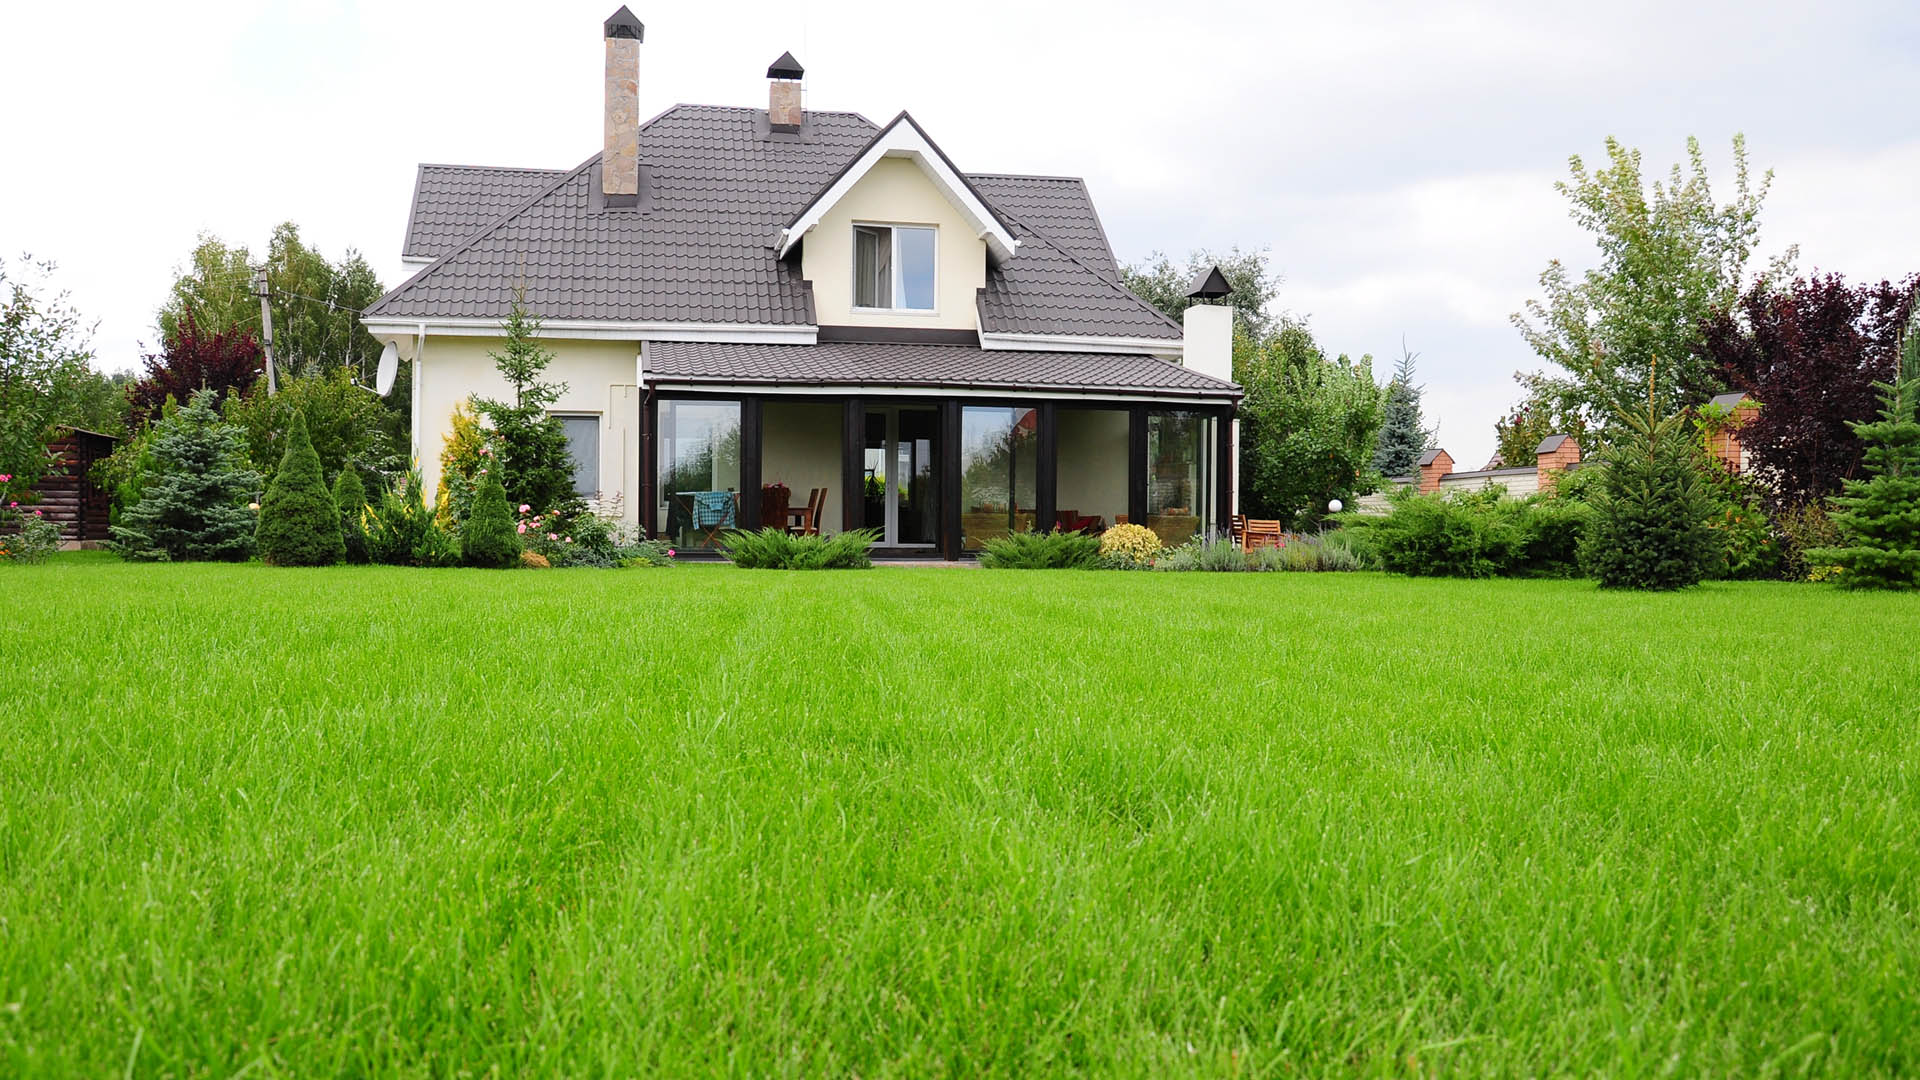 I’m a landscape expert – 5 easy things to do for a perfect lawn